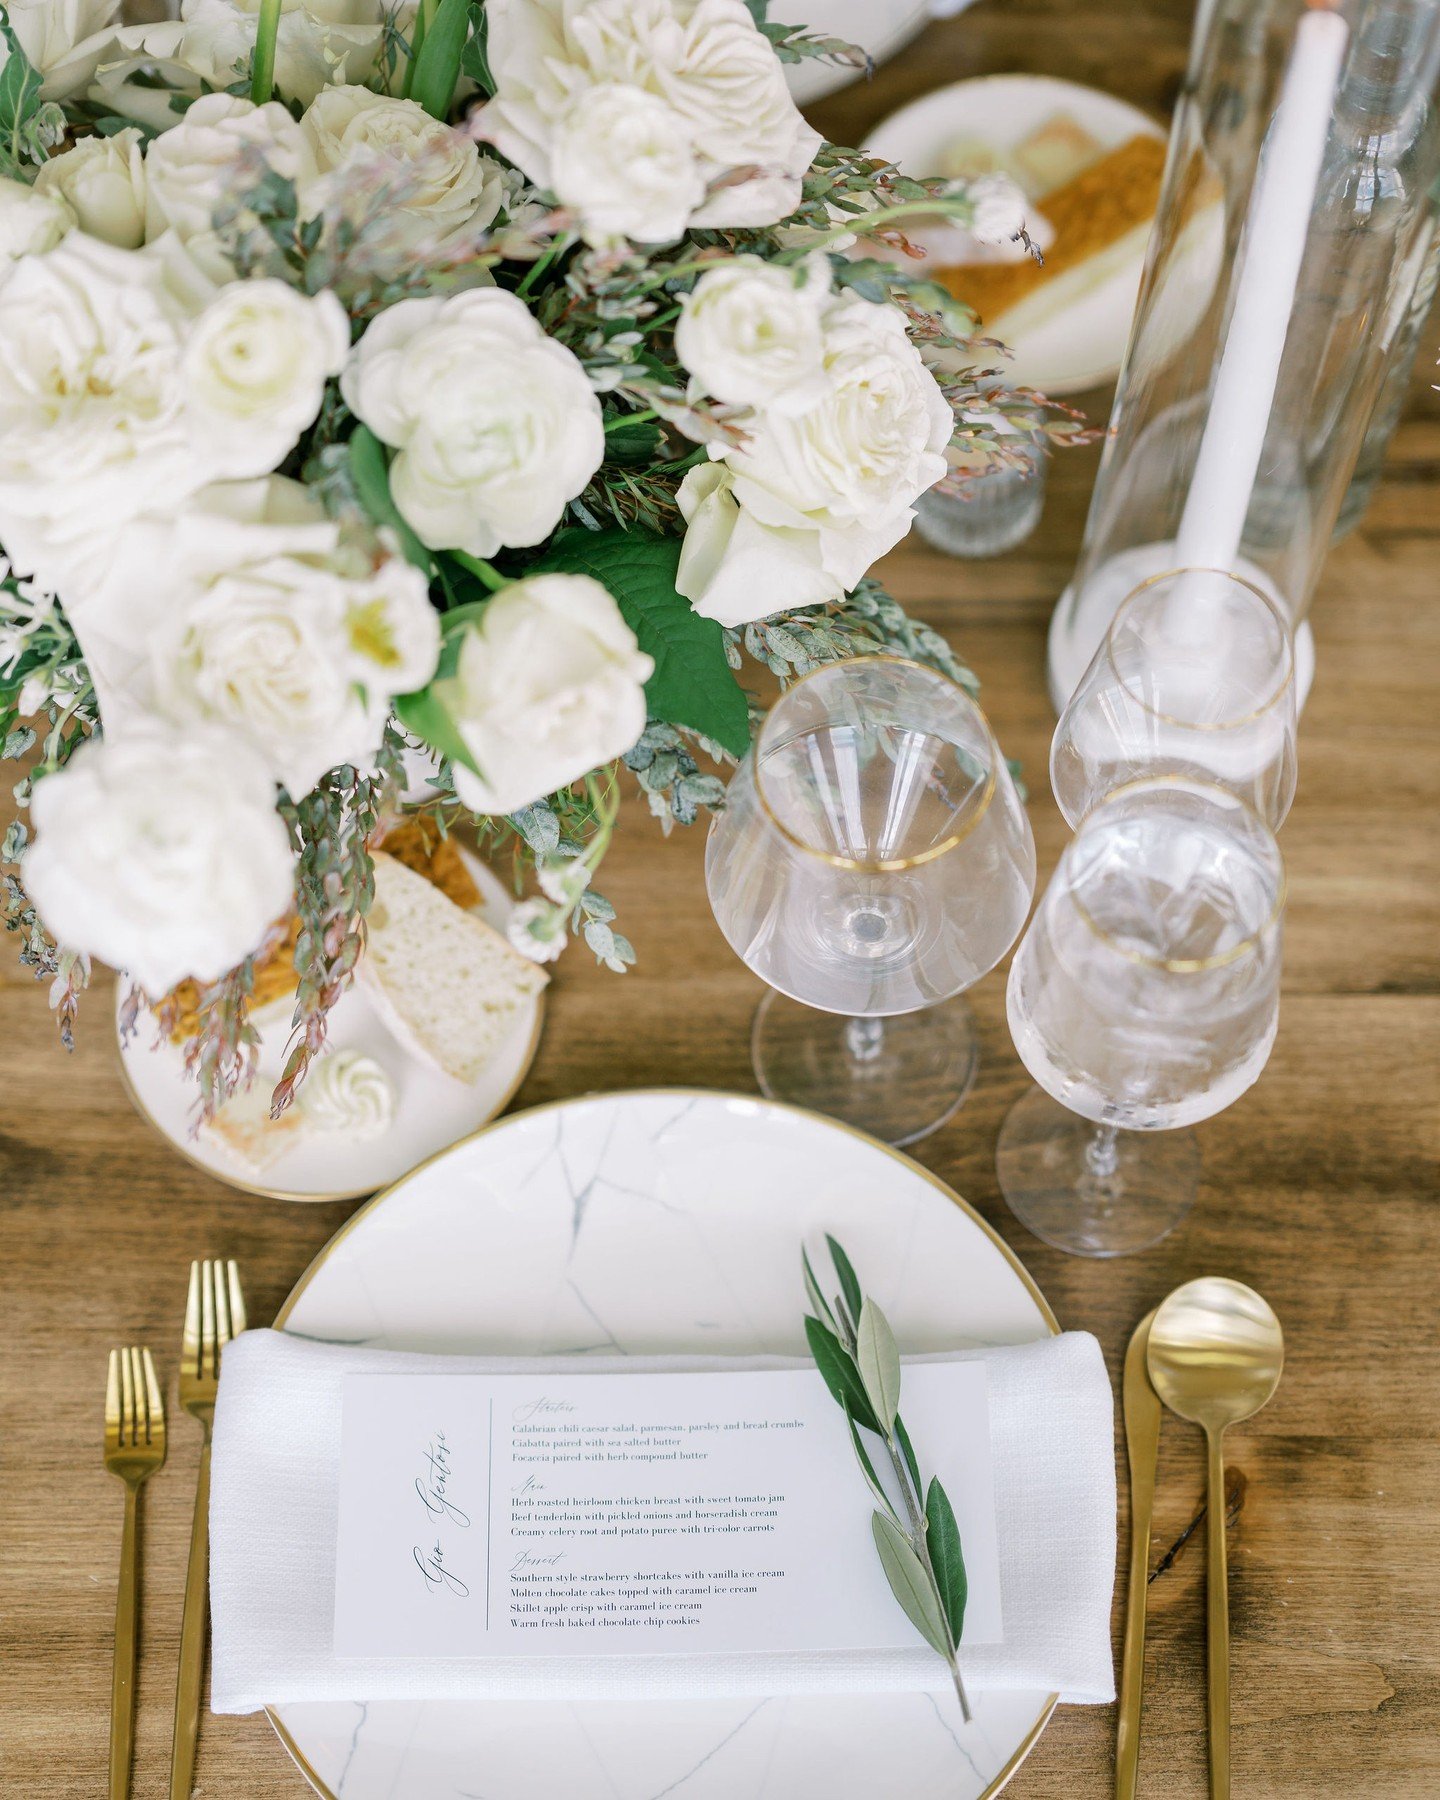 The soft details of the marble charger, textured floral, and Panama napkin bring so much life to this place setting!

#parkcityweddingplanner #riverbottomsranchwedding #parkcitywedding #weddingdesign #destinationwedding #destinationweddingplanner